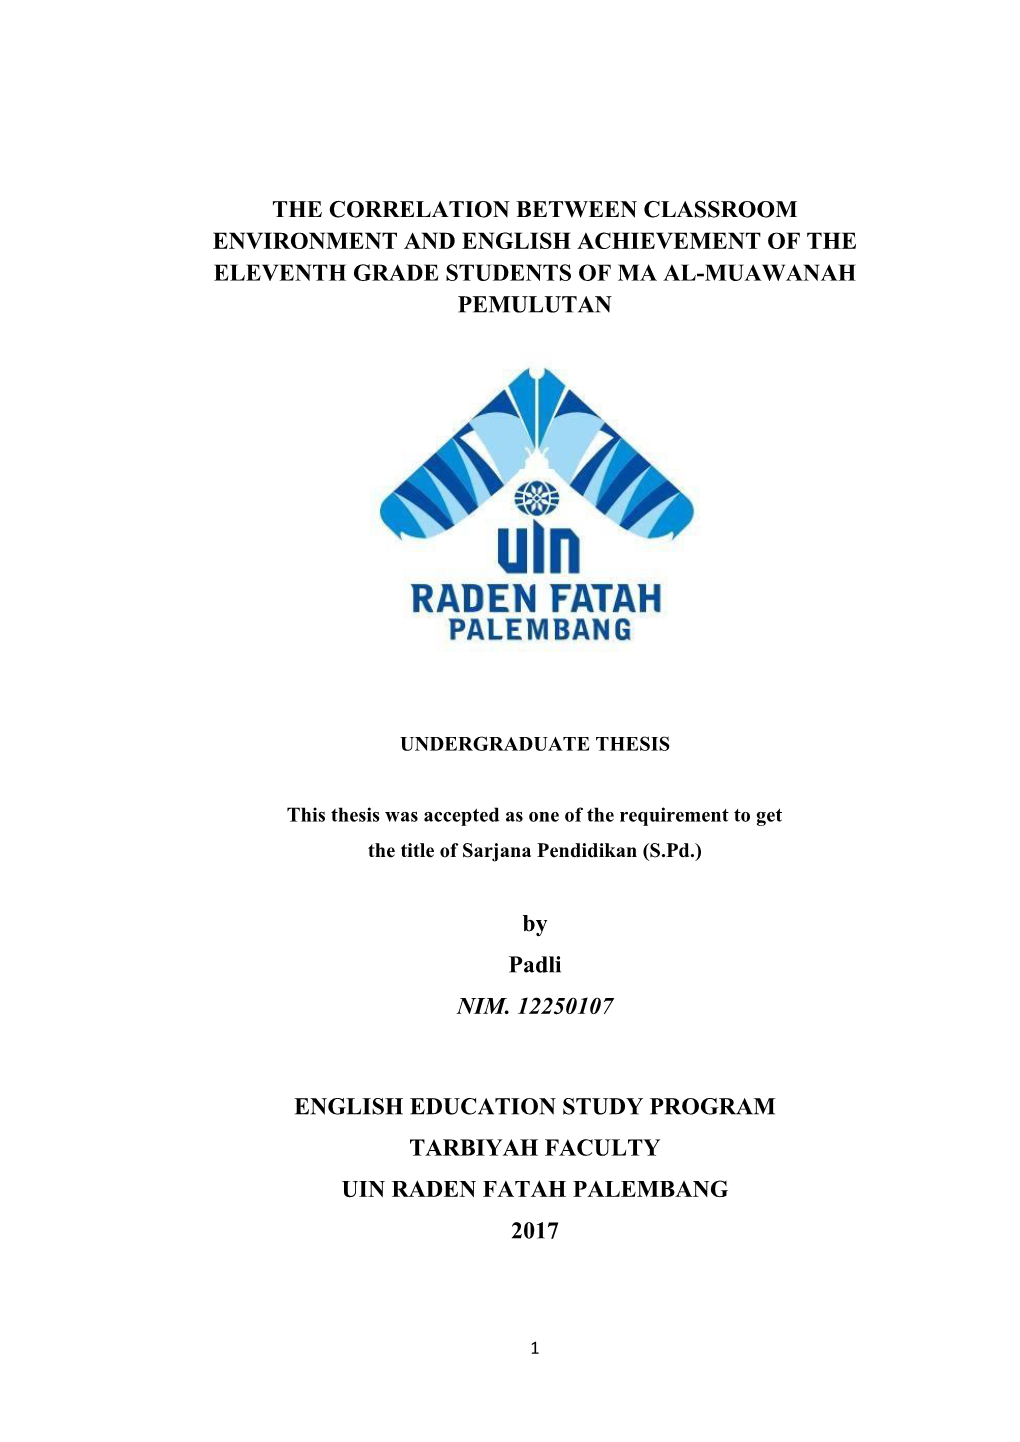 The Correlation Between Classroom Environment and English Achievement of the Eleventh Grade Students of Ma Al-Muawanah Pemulutan